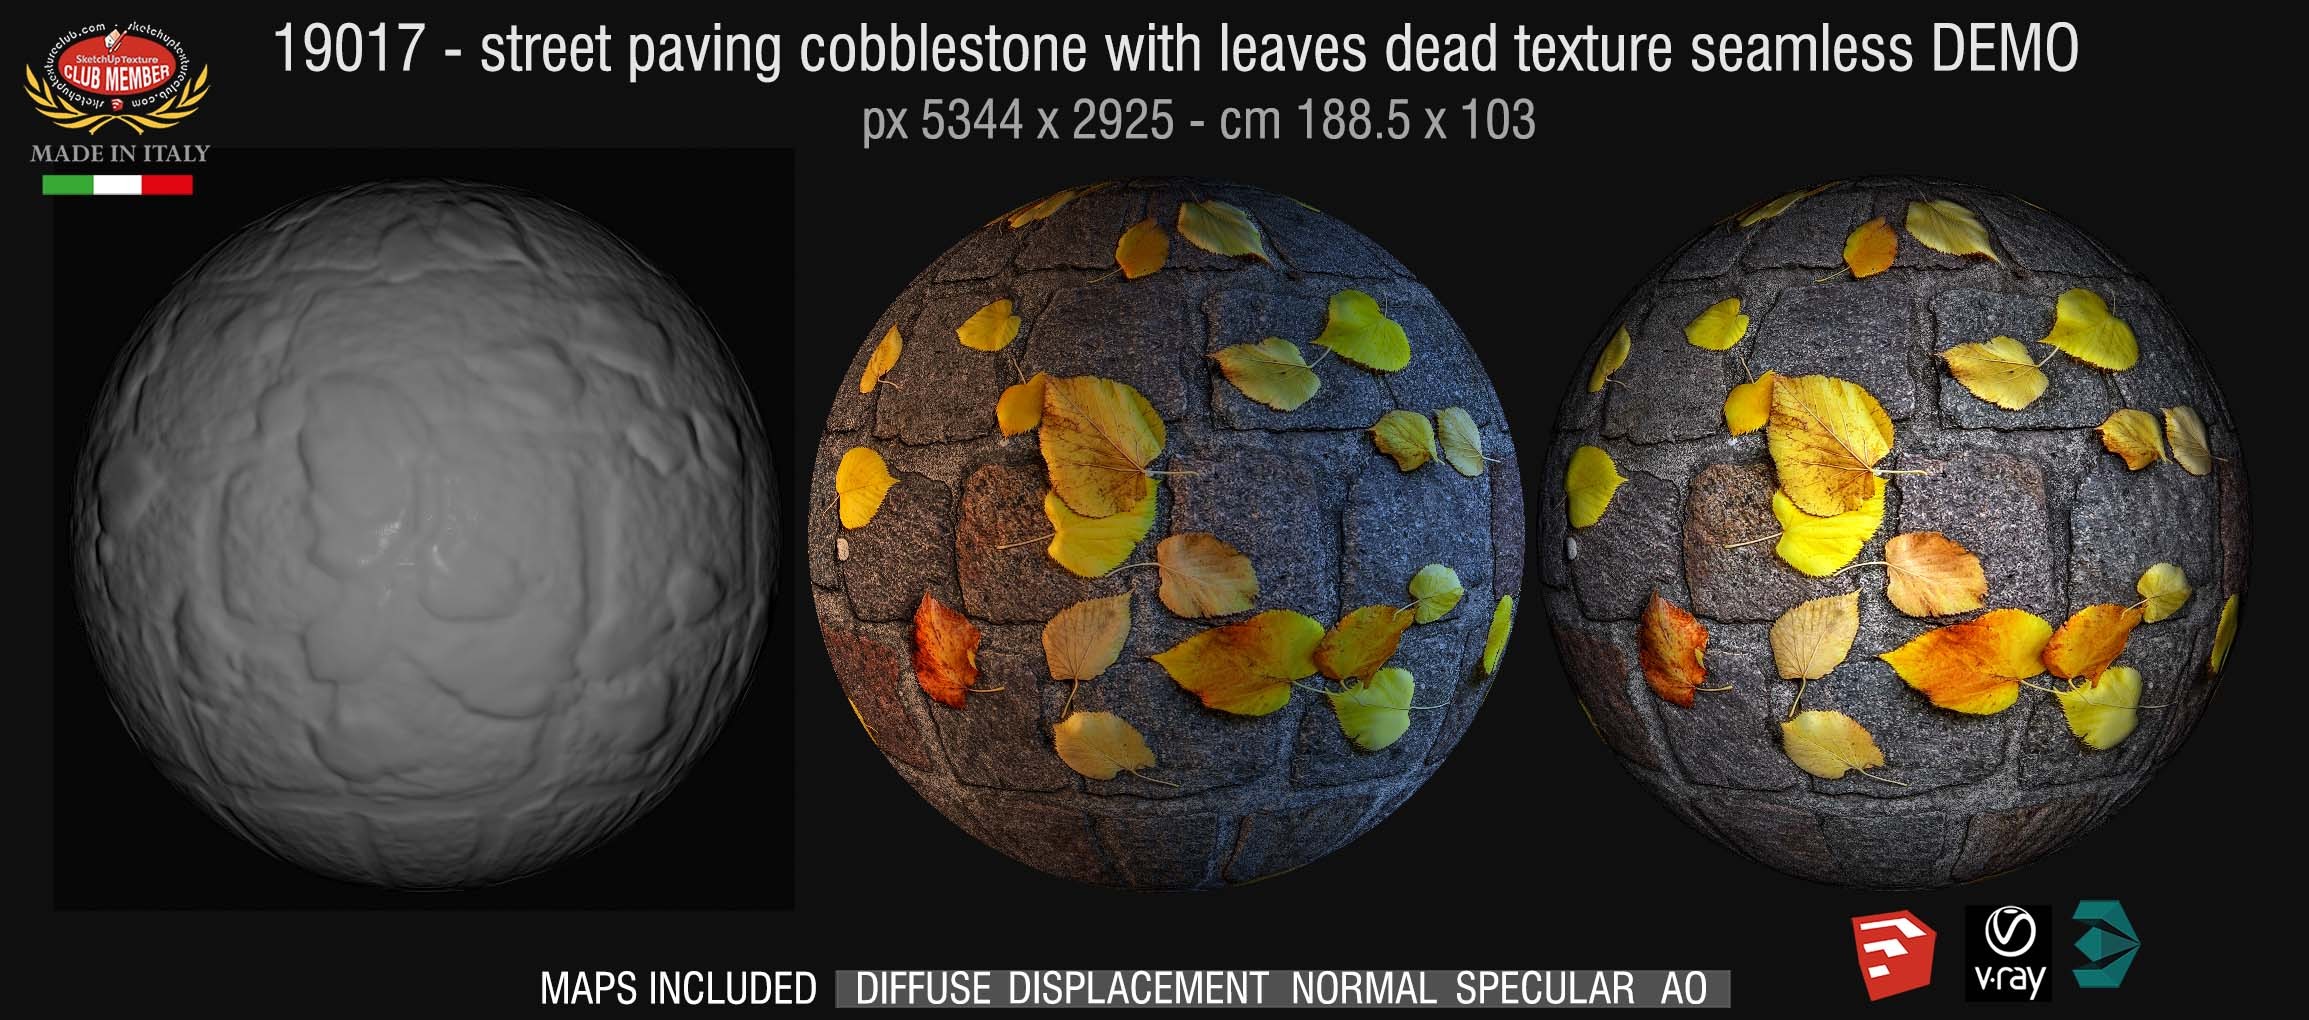 19017 HR Street paving cobblestone with leaves dead texture + maps DEMO